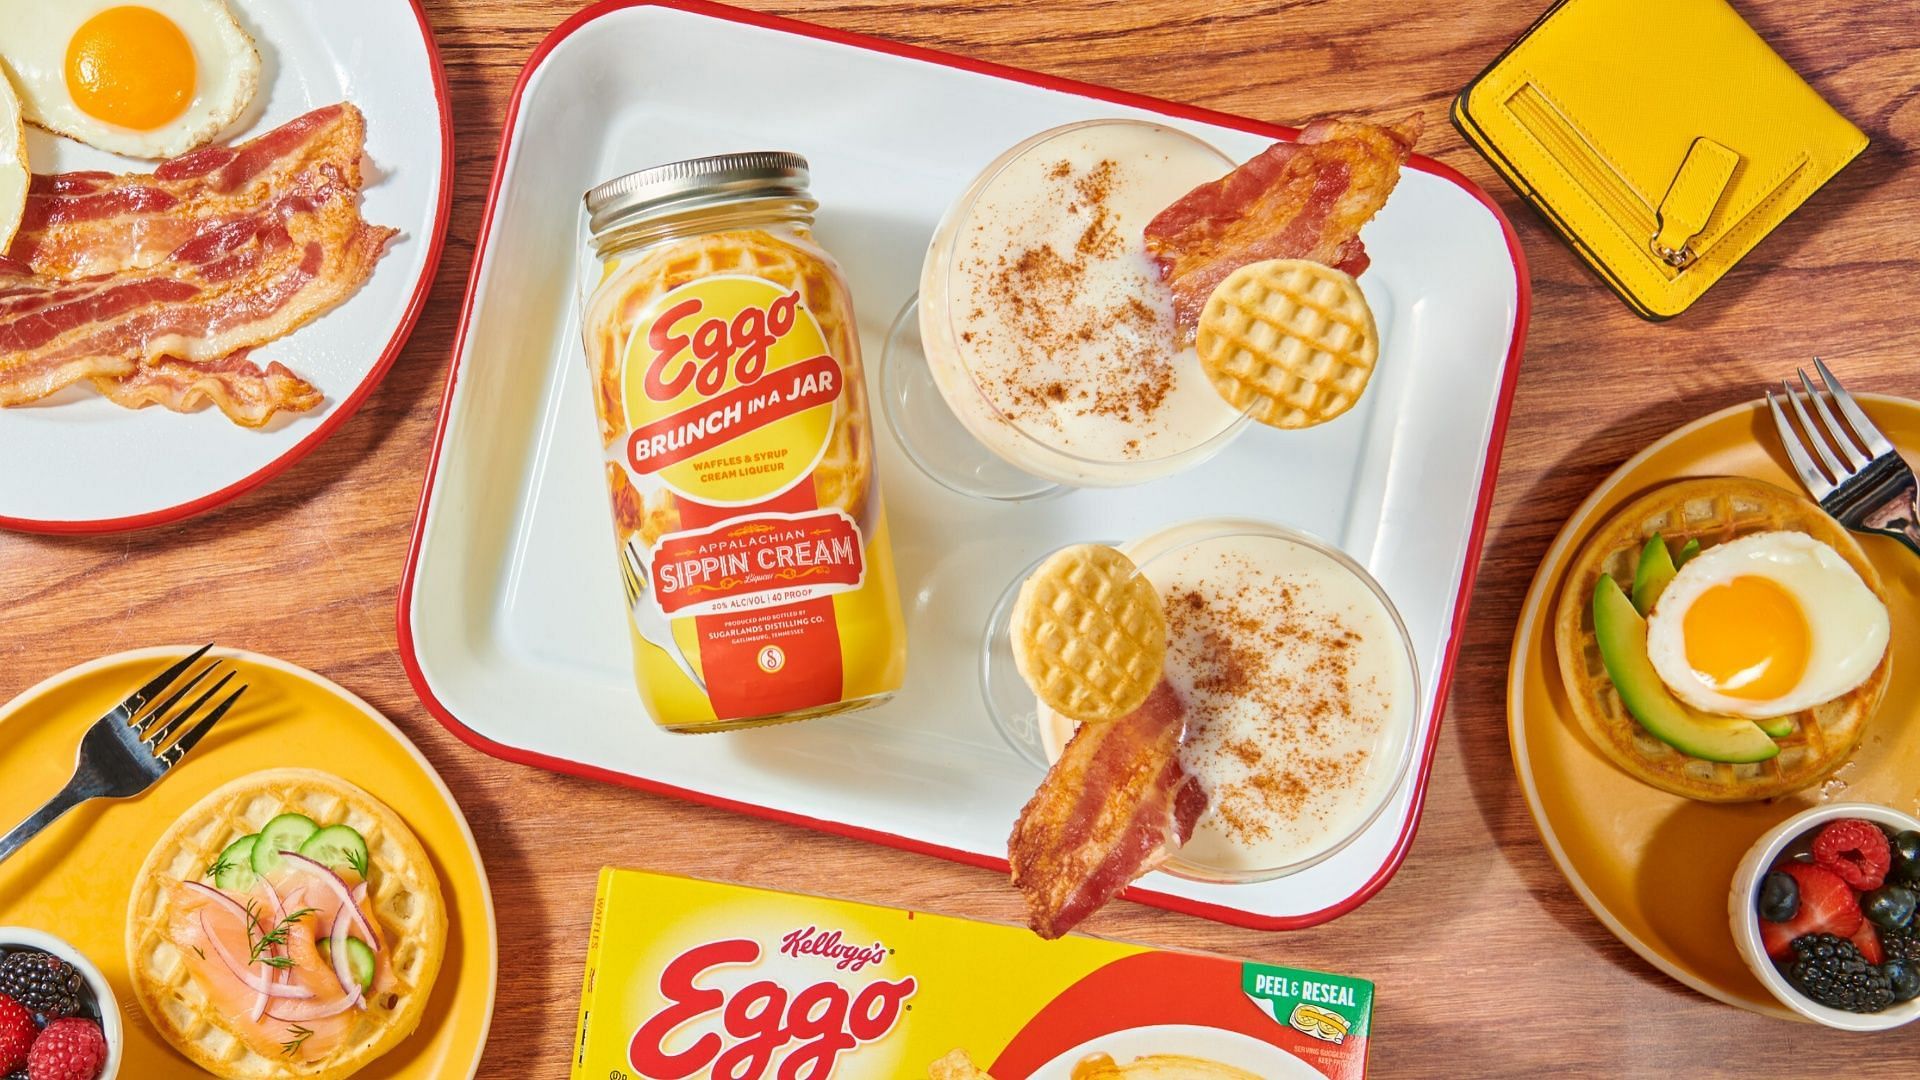 The EGGO Brunch in a Jar Sippin&#039; Cream liqueur can only be purchased by individuals aged 21 years or older (Image via Kellog&#039;s)